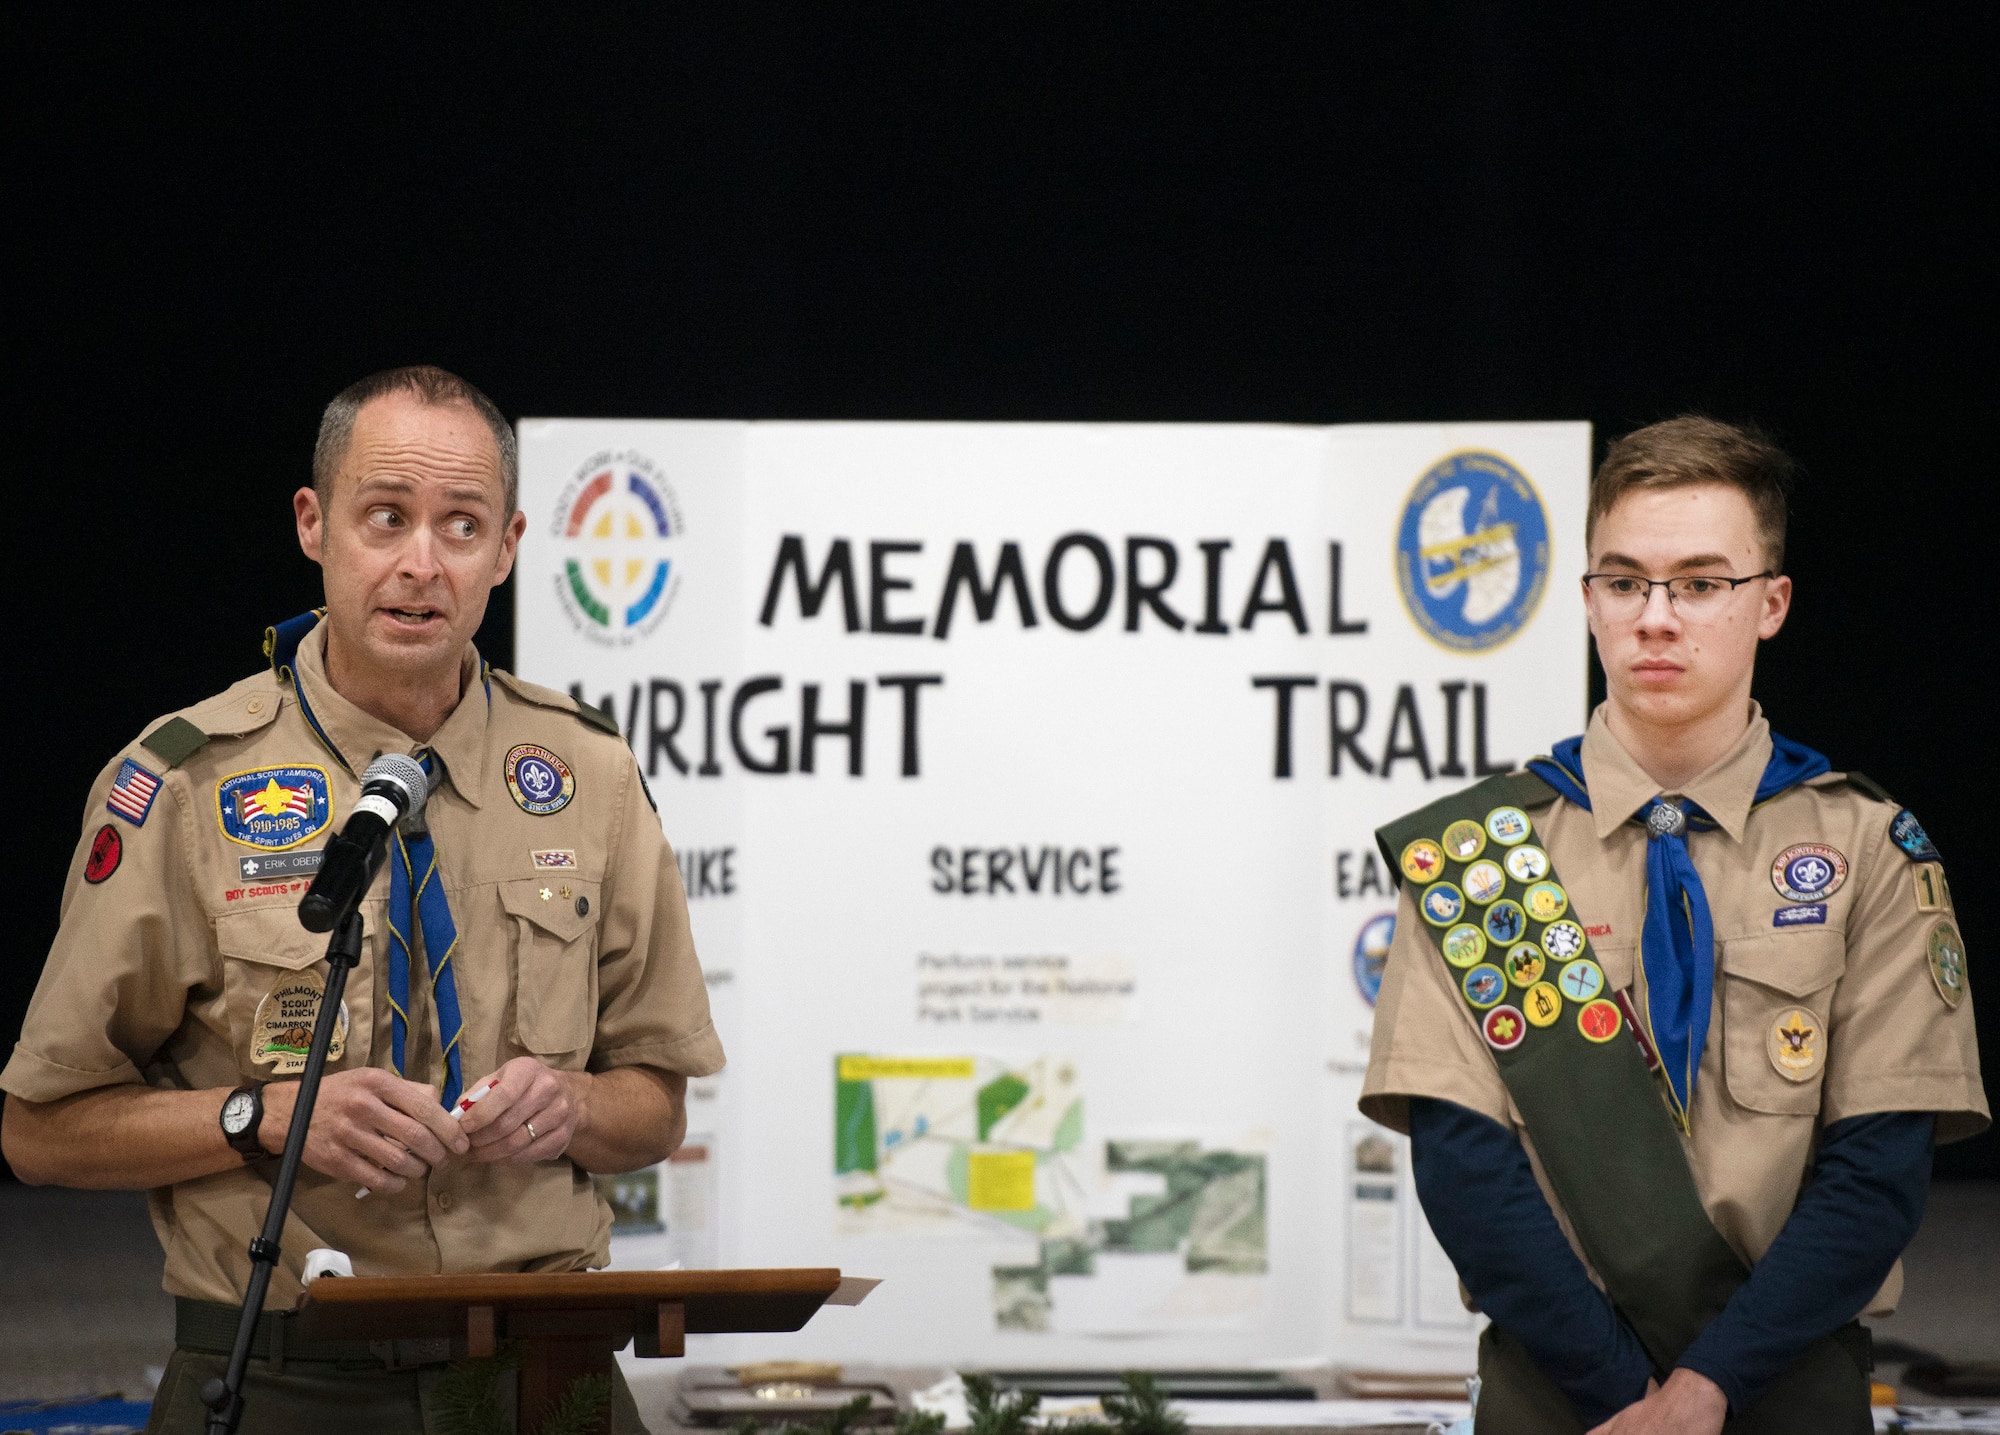 Boy Scout Troop 162 Scoutmaster Erik Oberg (left) talks to his scouts, their parents and friends about the troop’s history during its 75th anniversary celebration Dec. 13, 2021 at Abiding Christ Lutheran Church in Fairborn, Ohio. At right is Matthew Greiner, 13, the troop’s senior patrol leader and son of an active duty member of the Air Force. (U.S. Air Force photo by R.J. Oriez)